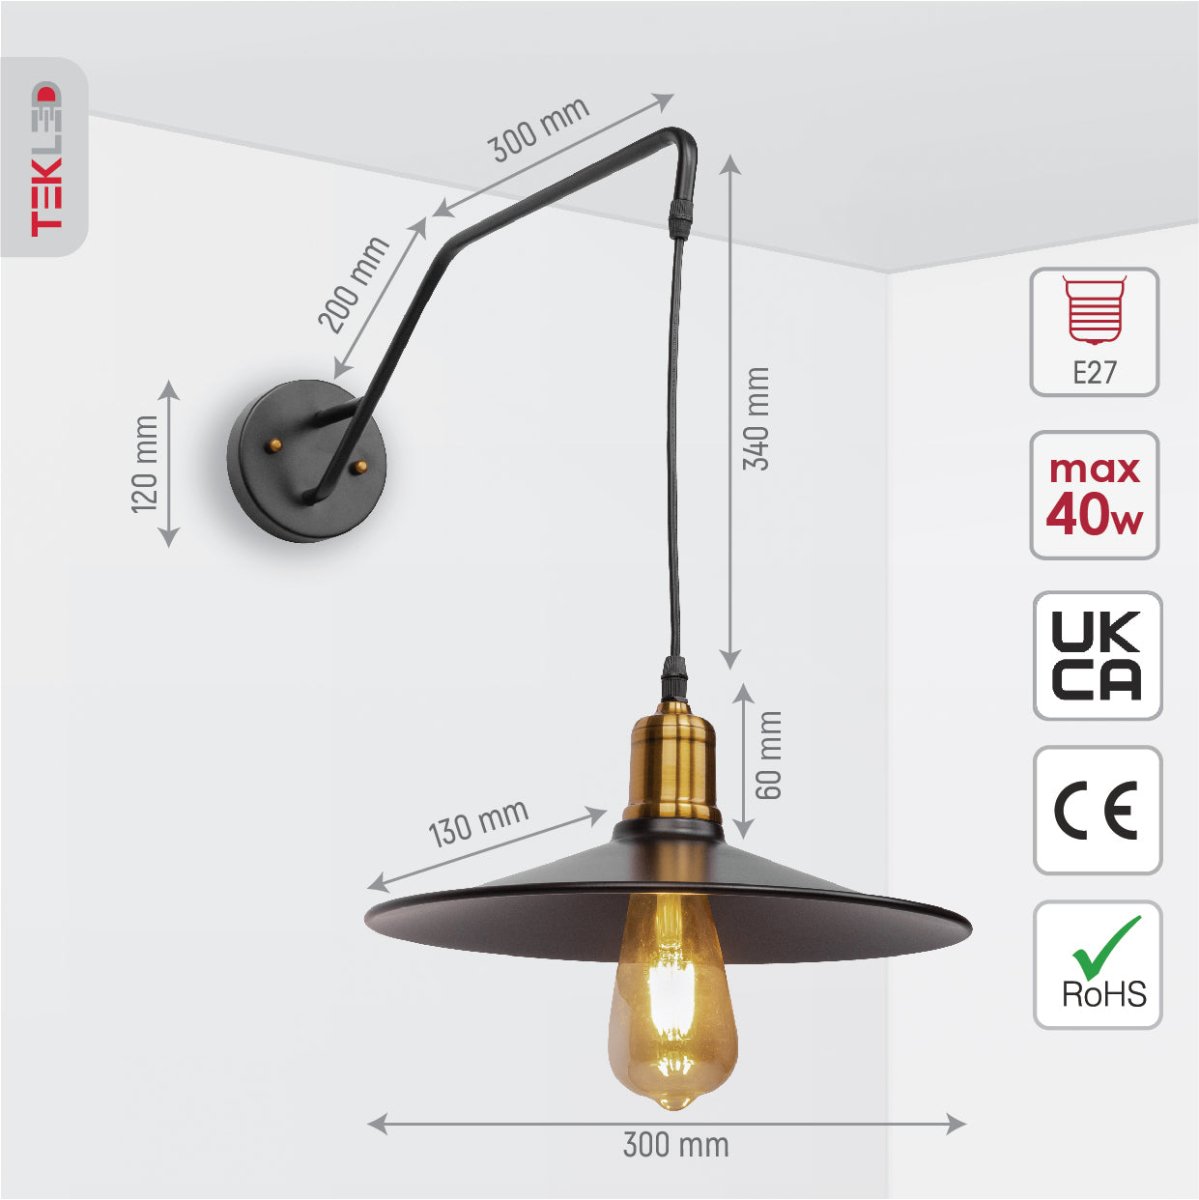 Size and specs of Black Gold Metal Suspended Wall Light with E27 Fitting | TEKLED 151-19636